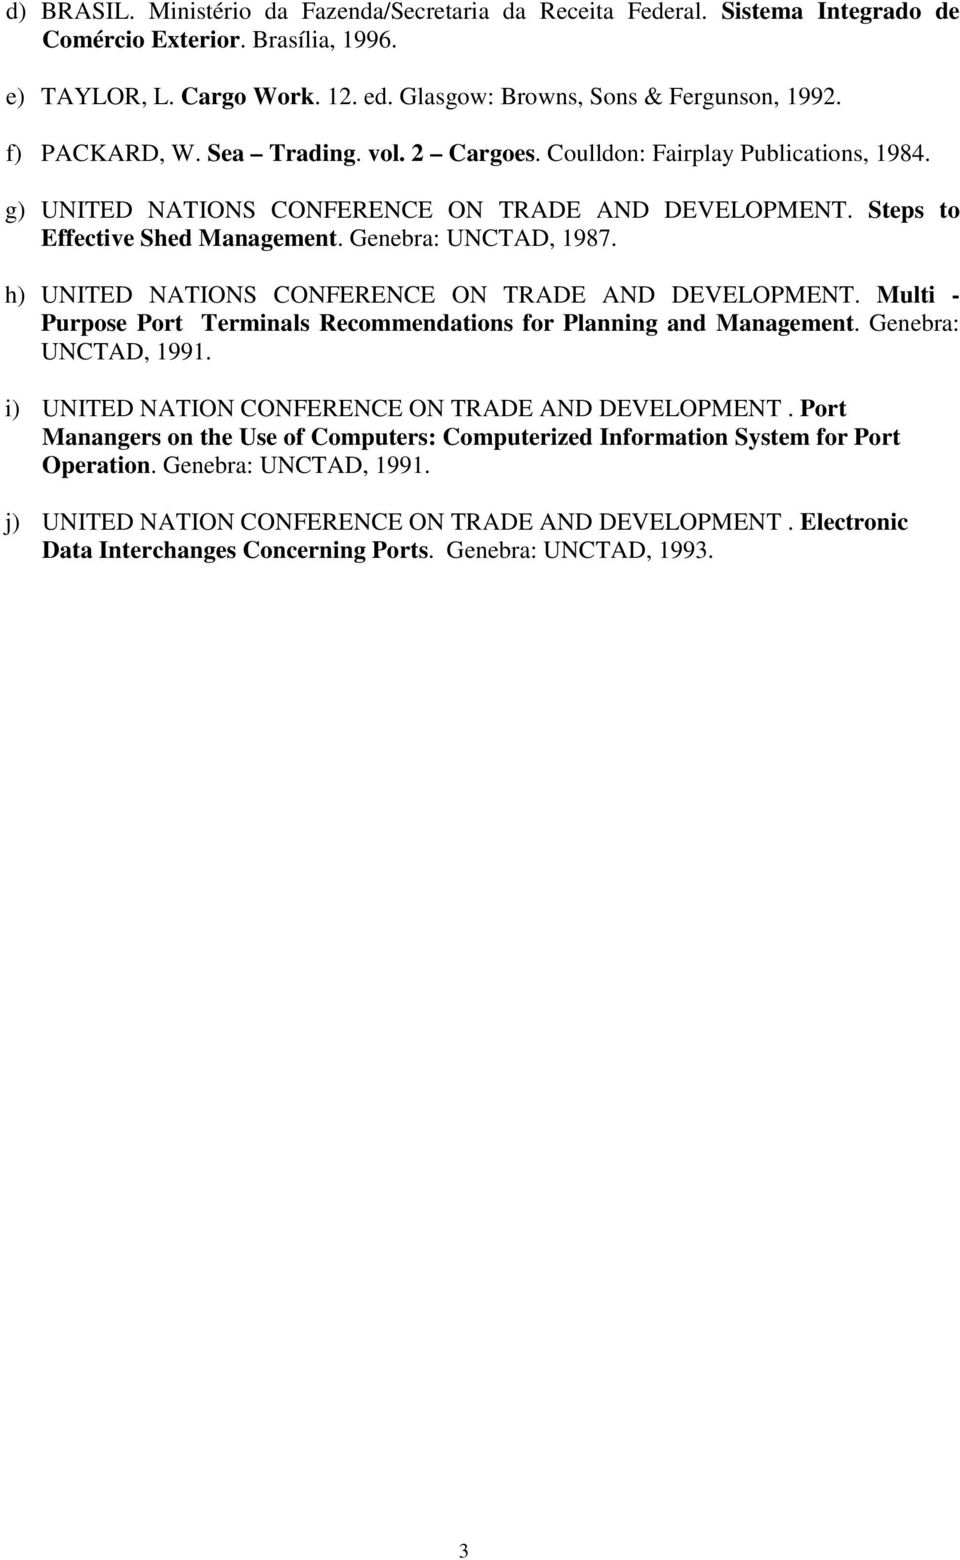 h) UNITED NATIONS CONFERENCE ON TRADE AND DEVELOPMENT. Multi - Purpose Port Terminals Recommendations for Planning and Management. Genebra: UNCTAD, 1991.